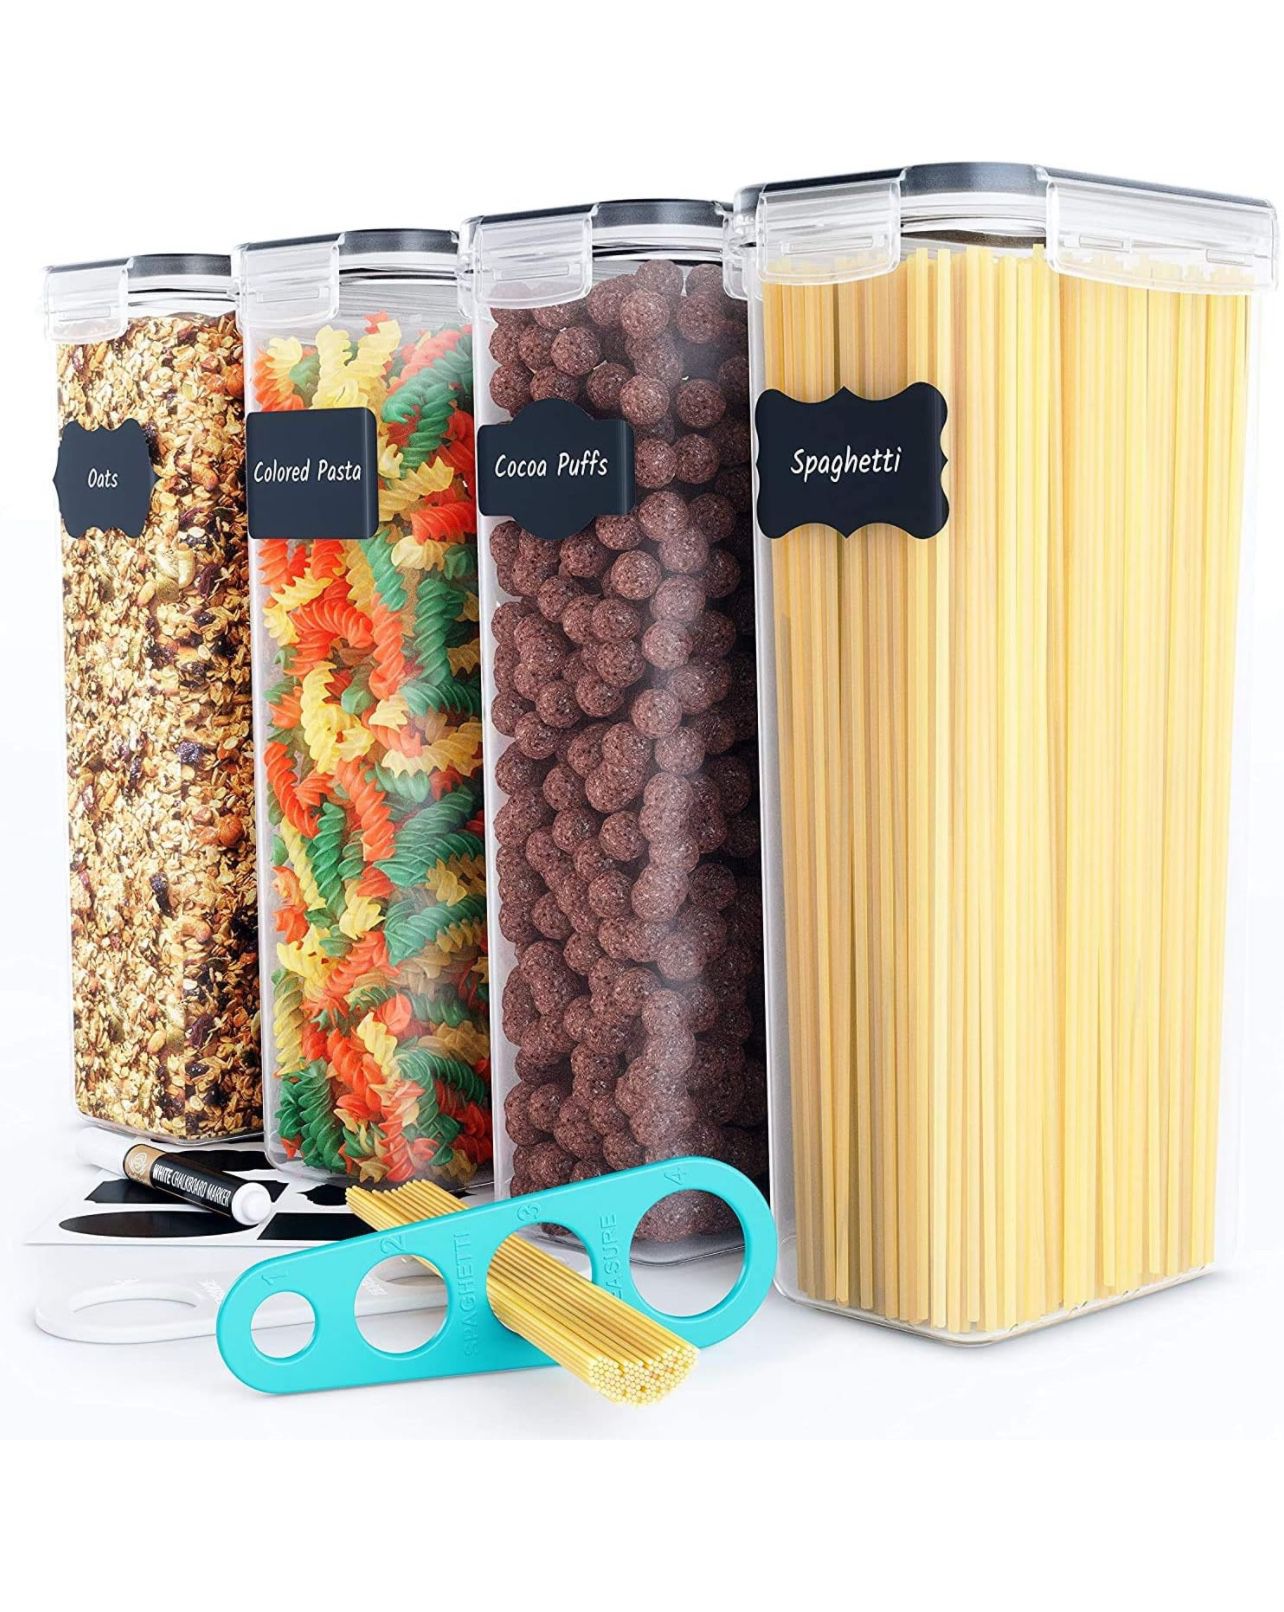 Chef's Path Airtight Food Storage Containers (Set of 4, 2.8L) - Tall for Pantry & Kitchen Organization, Pasta, Spaghetti, Noodles, Cereal - Lids, Nood